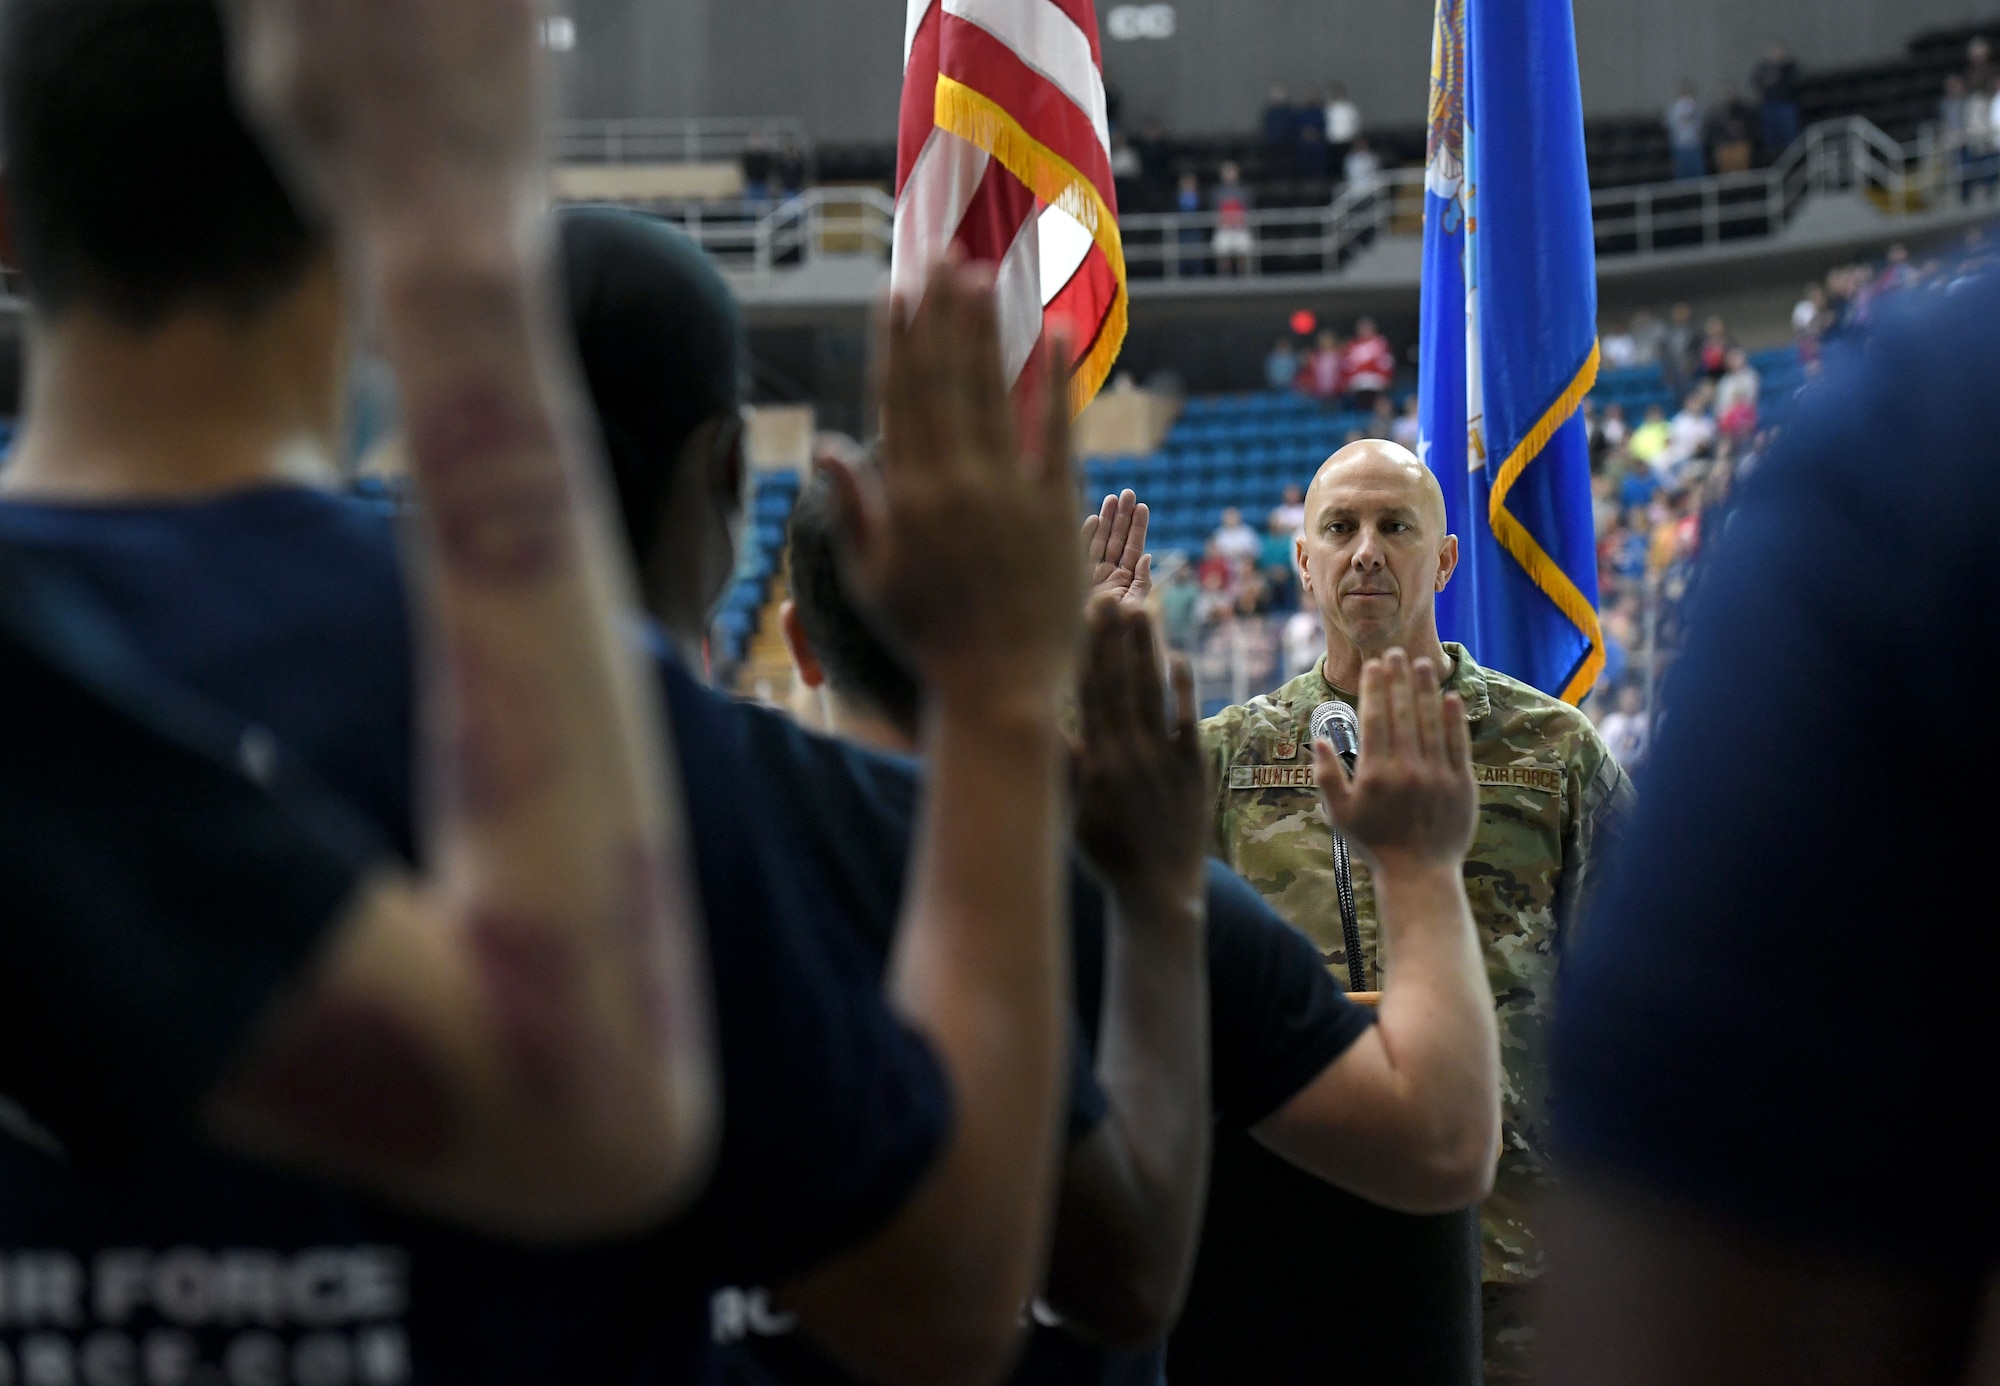 U.S. Air Force Col. William Hunter, 81st Training Wing commander, recites the oath of office to 16 Air Force delayed entry program recruits during the Biloxi Pro Hockey game inside the Mississippi Coast Coliseum at Biloxi, Mississippi, Dec. 2, 2021. The Keesler Air Force Base Honor Guard and Second Air Force leadership also participated in pre-game festivities. (U.S. Air Force photo by Kemberly Groue)